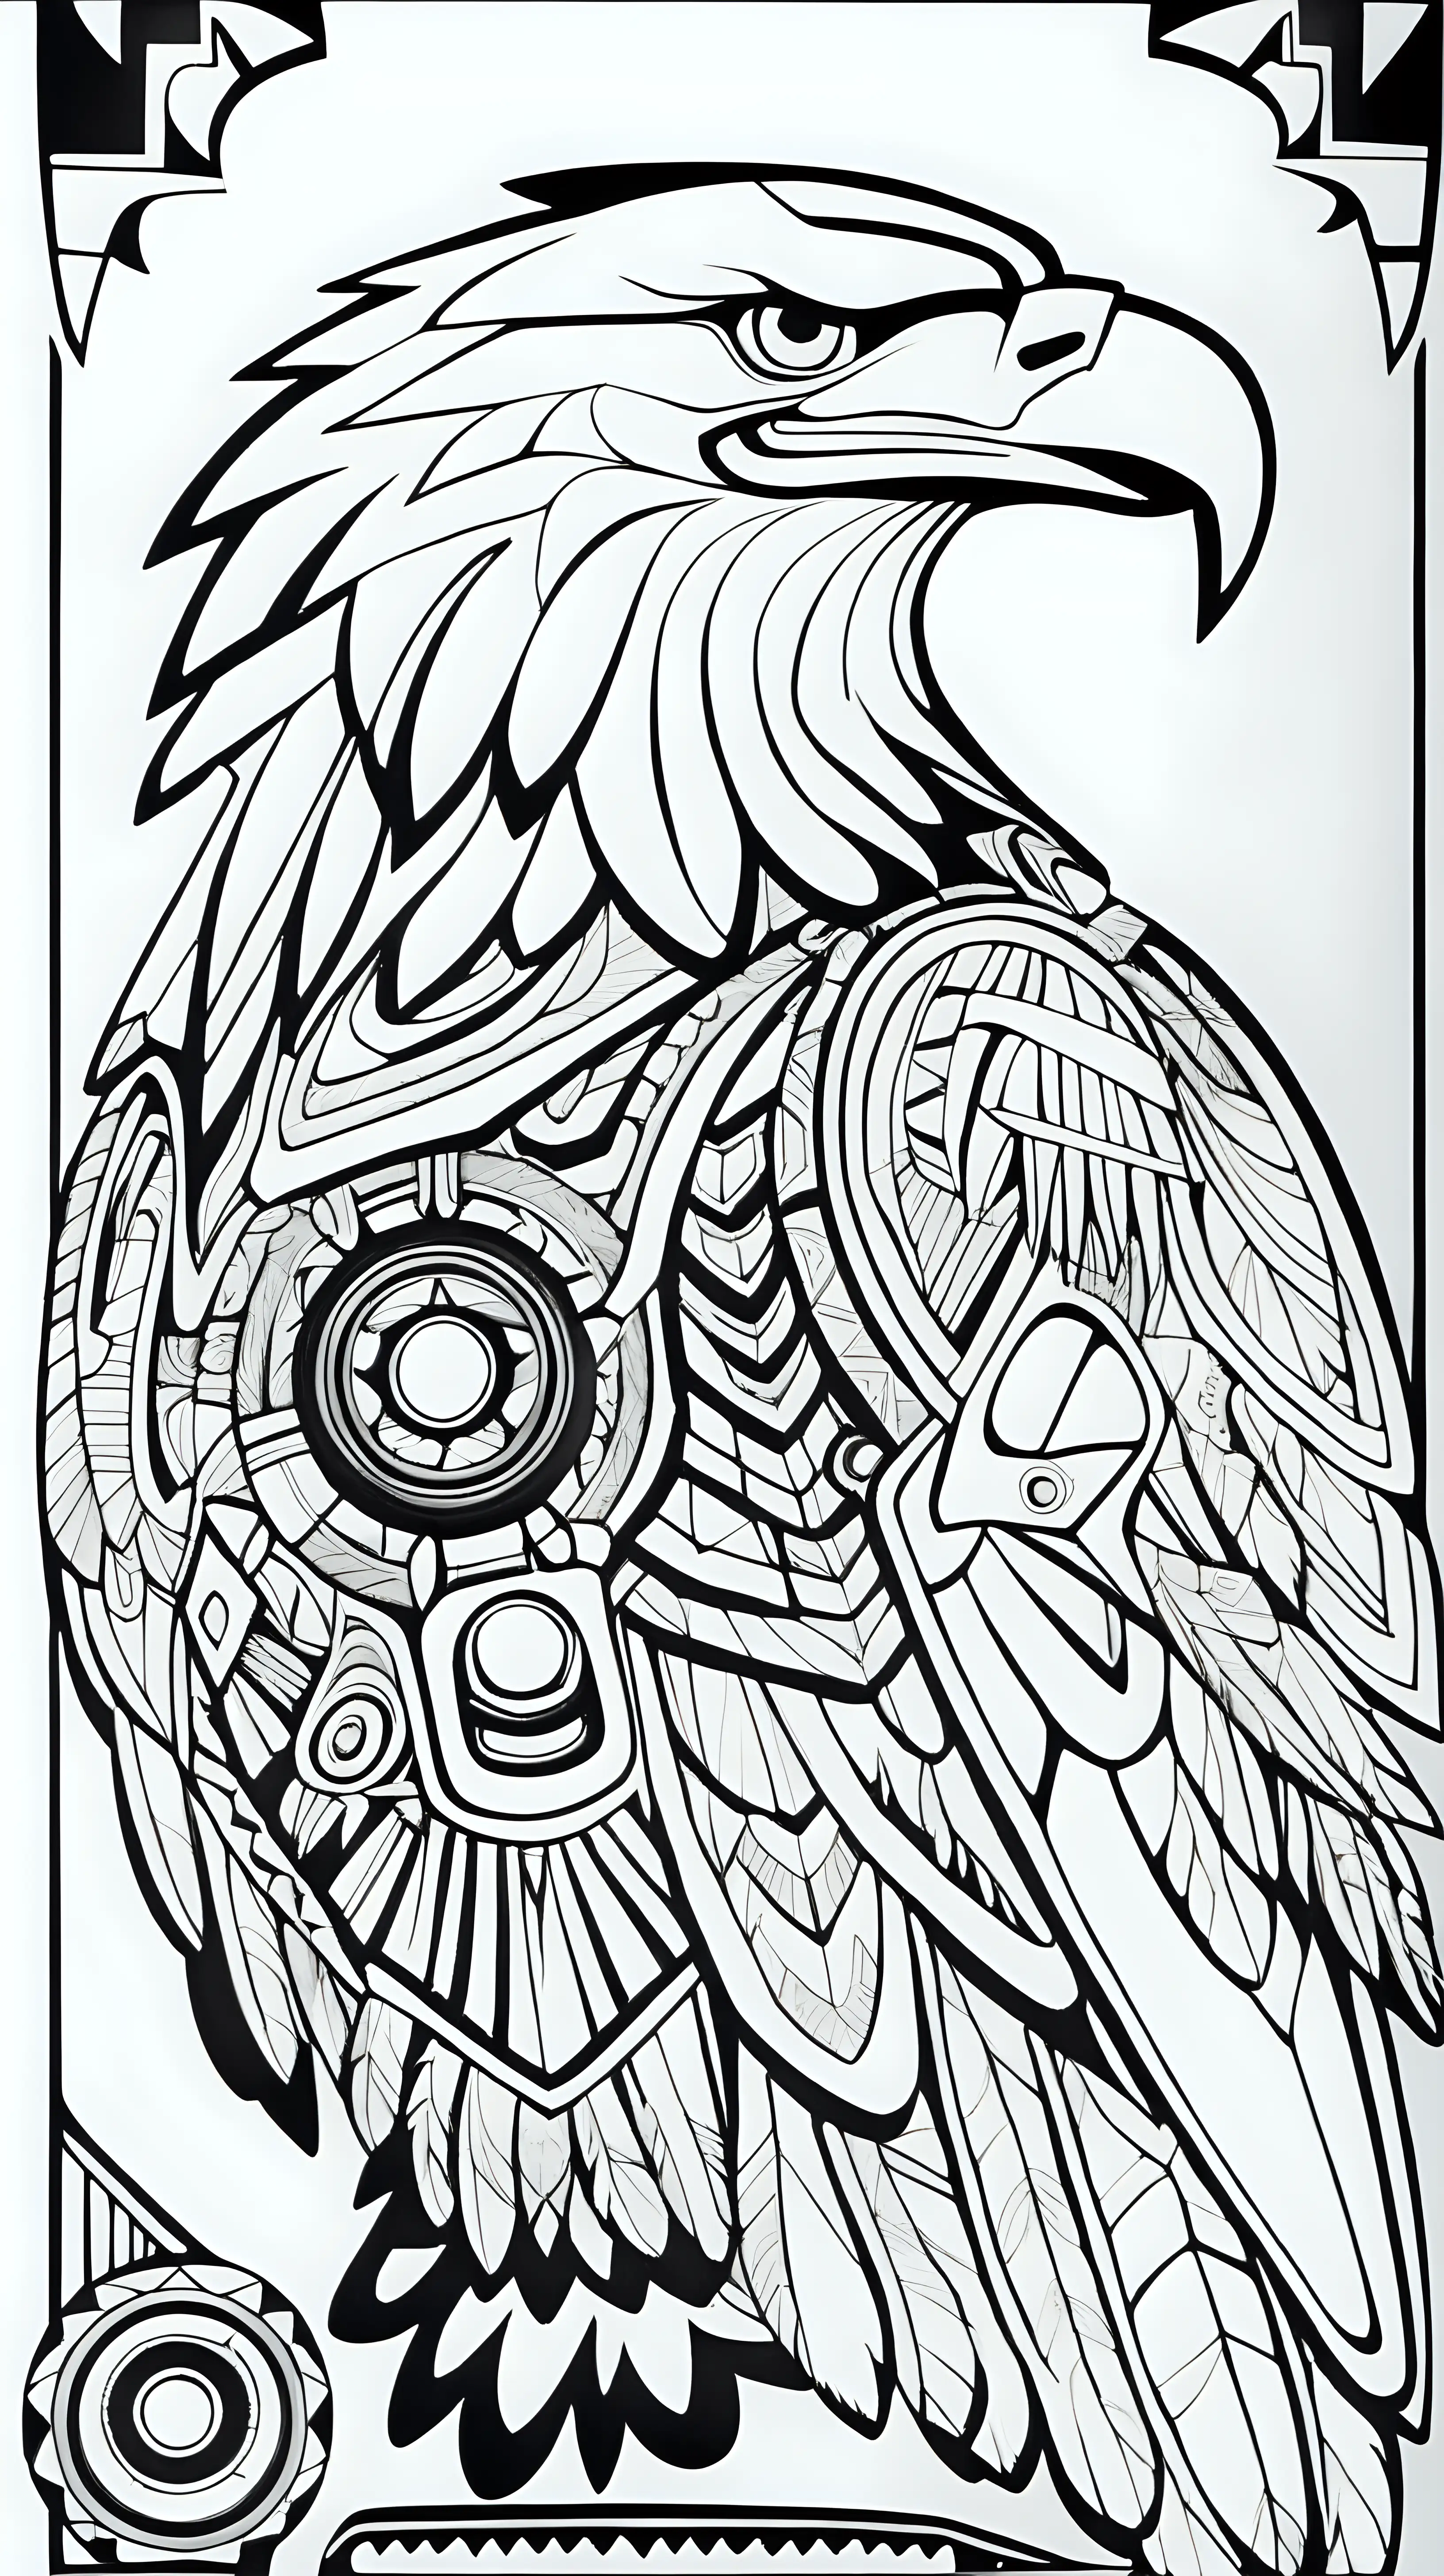 Navajo Inspired Eagle Totem Visionary Coloring Book Image with Bold Black Lines